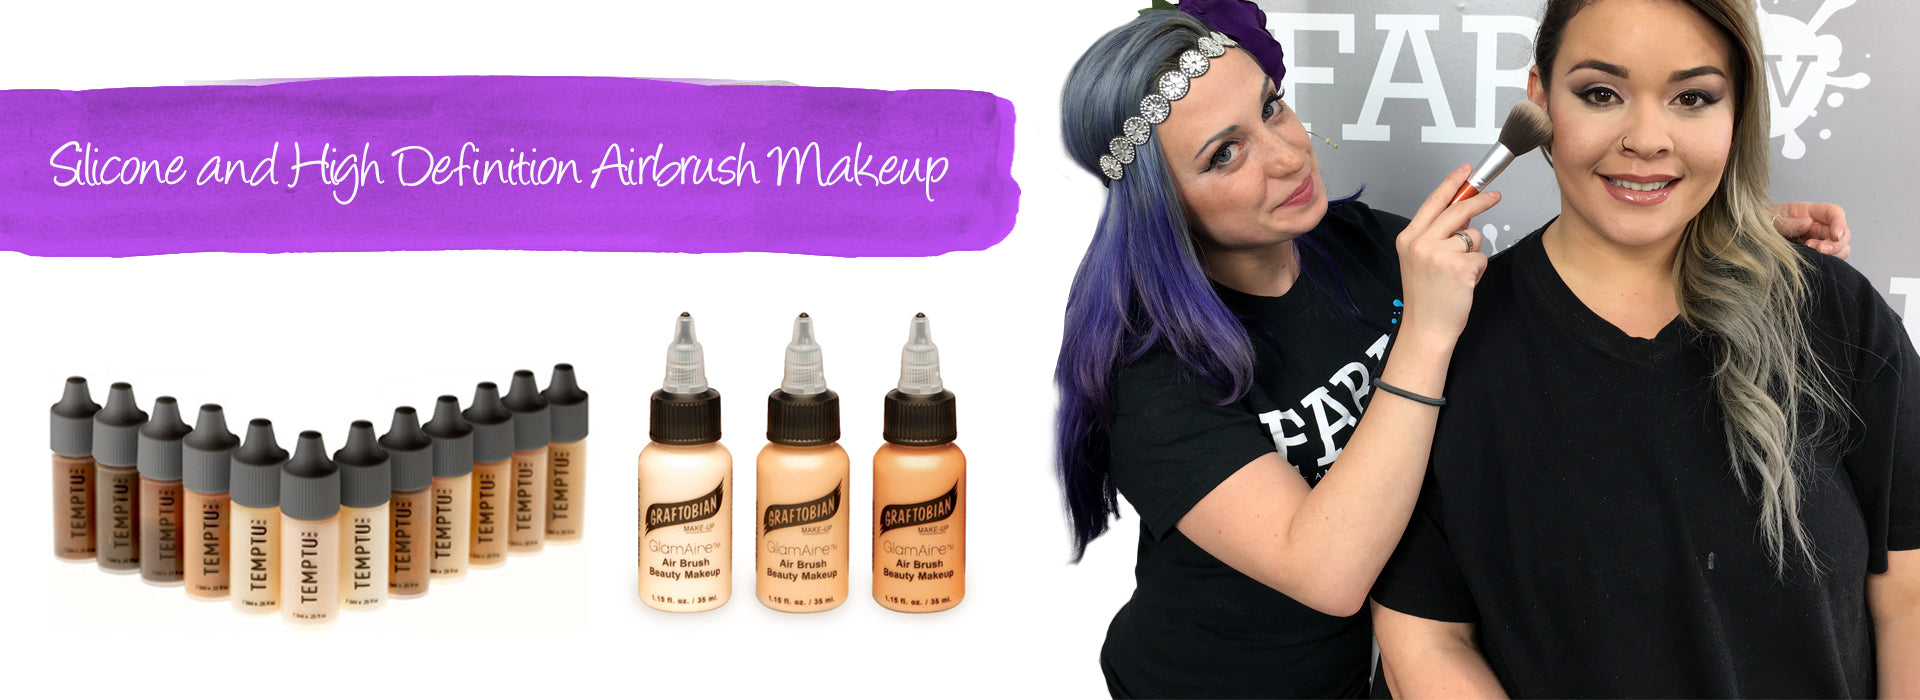 Silicone & High Definition Airbrush Makeup